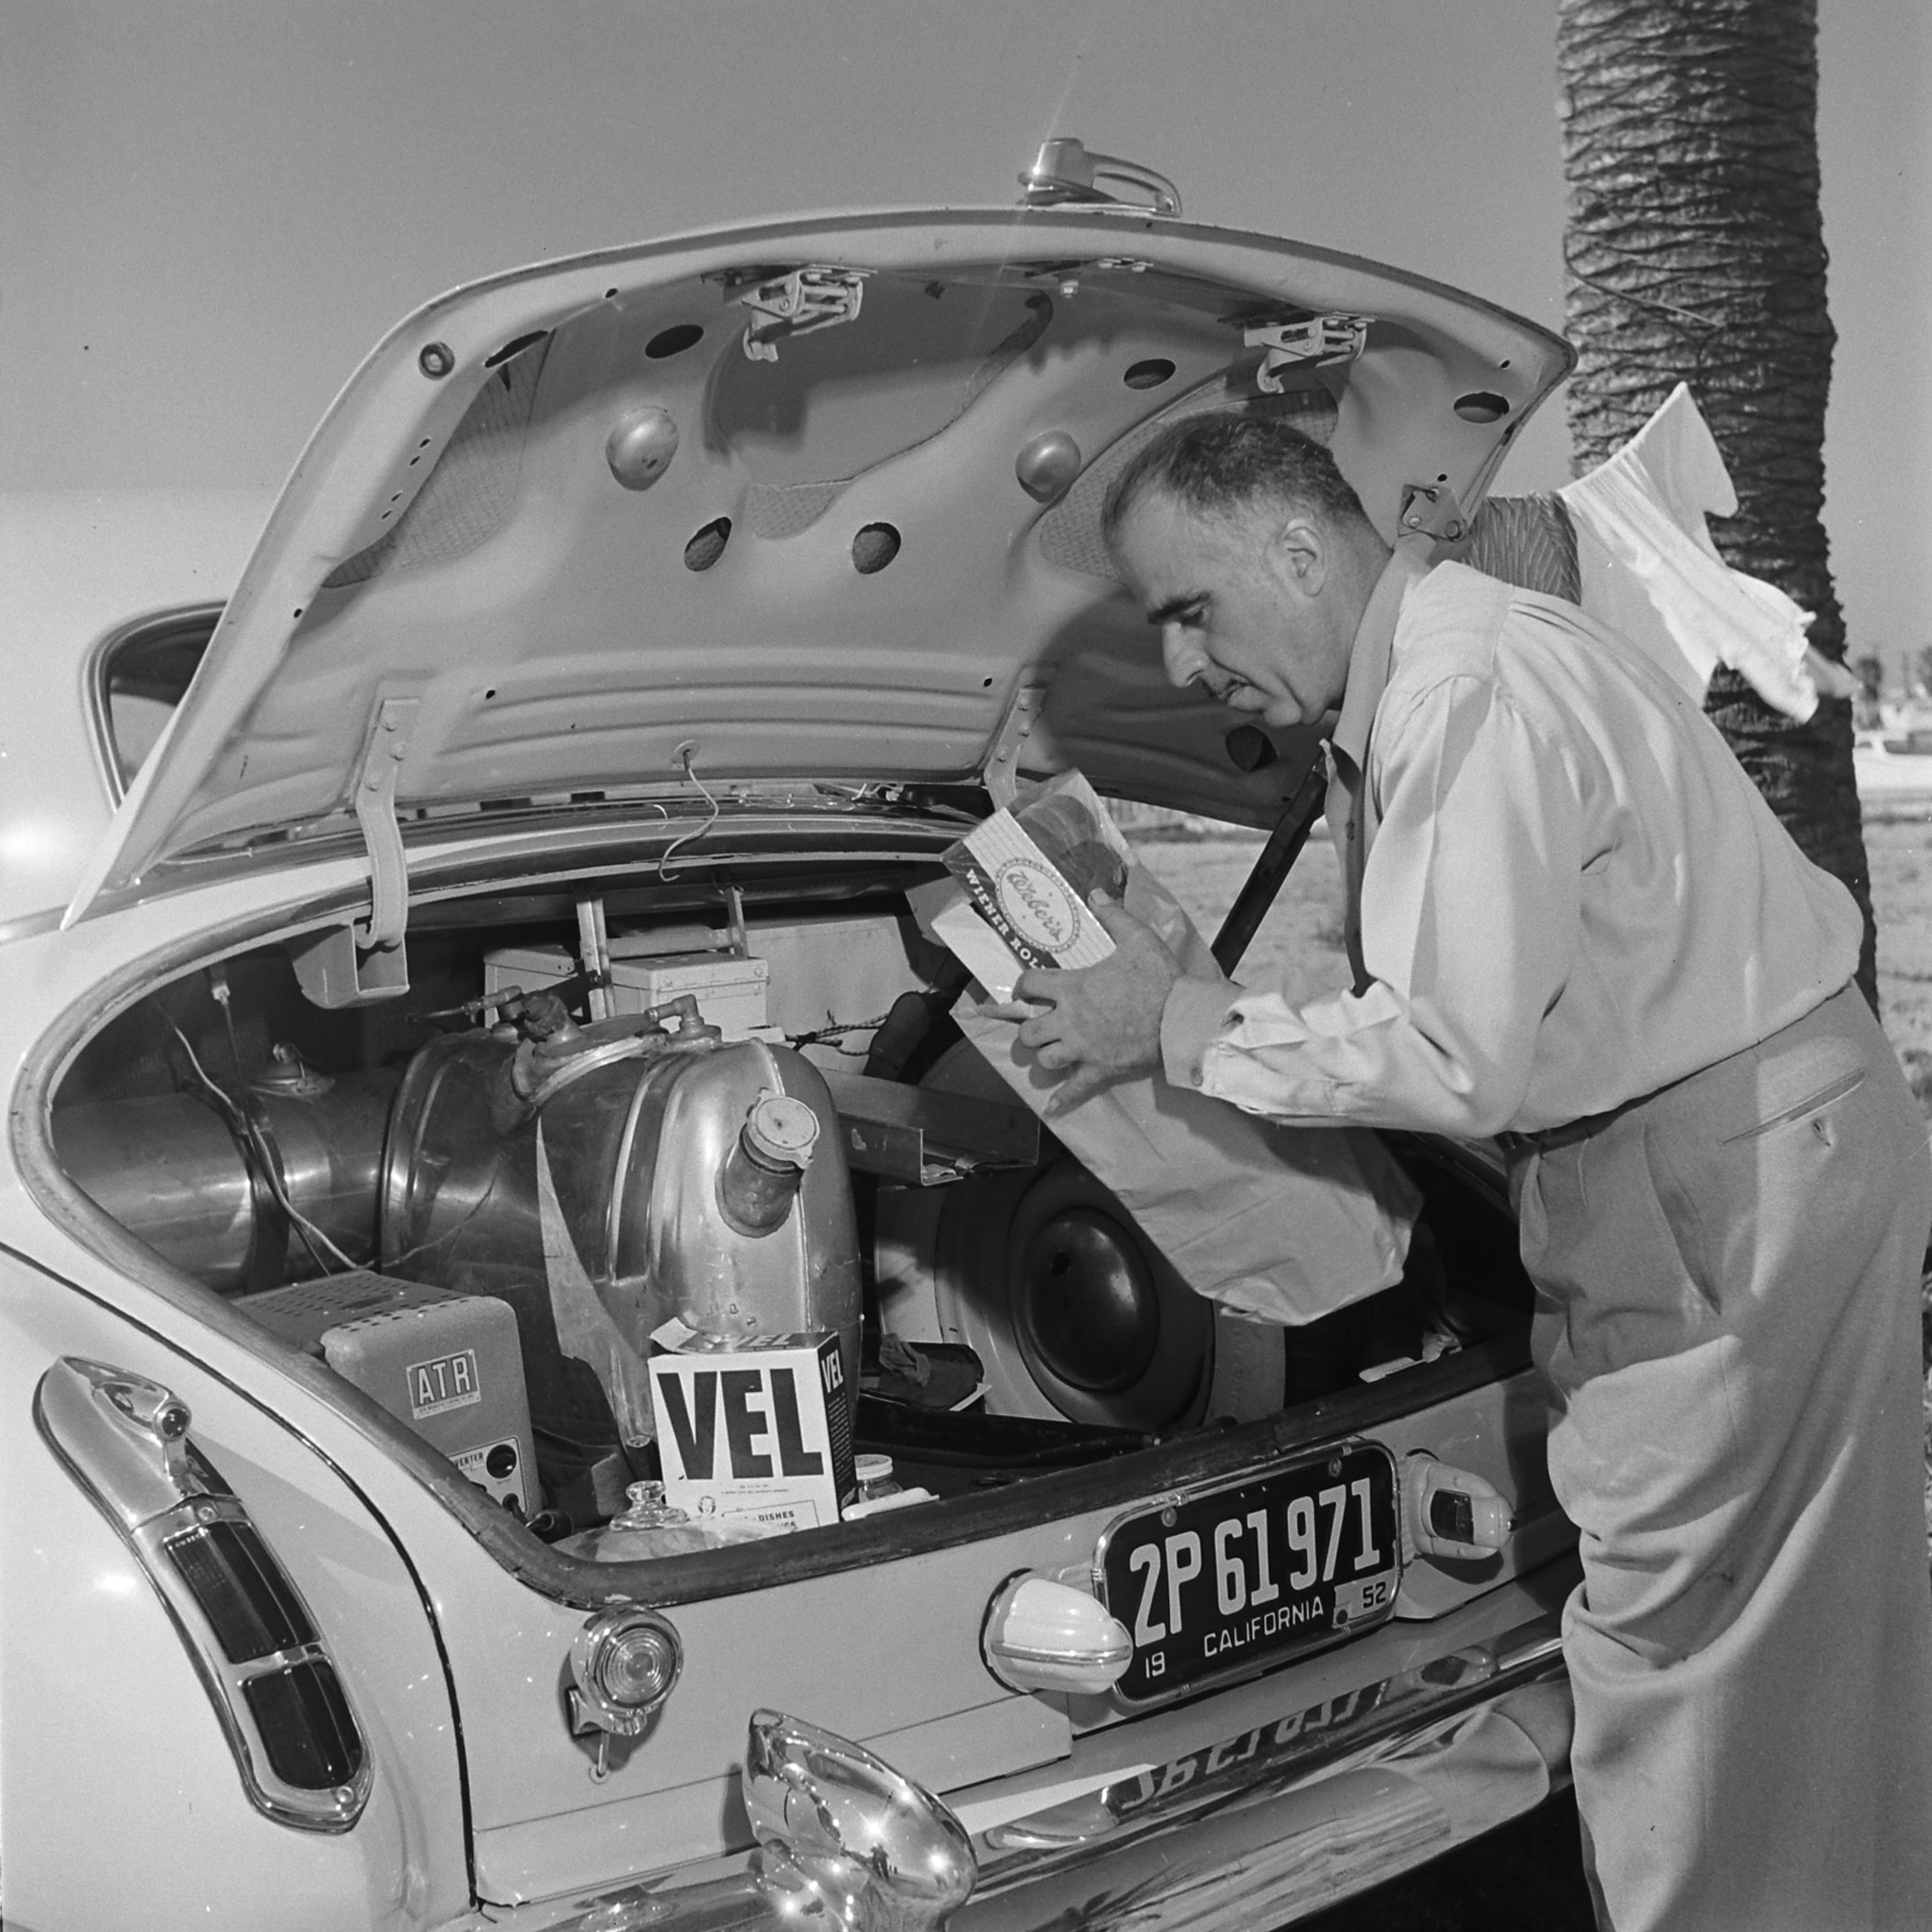 Louis Mattar pulls the makings of a meal from the trunk of his heavily modified 1947 Cadillac, San Diego, 1952.